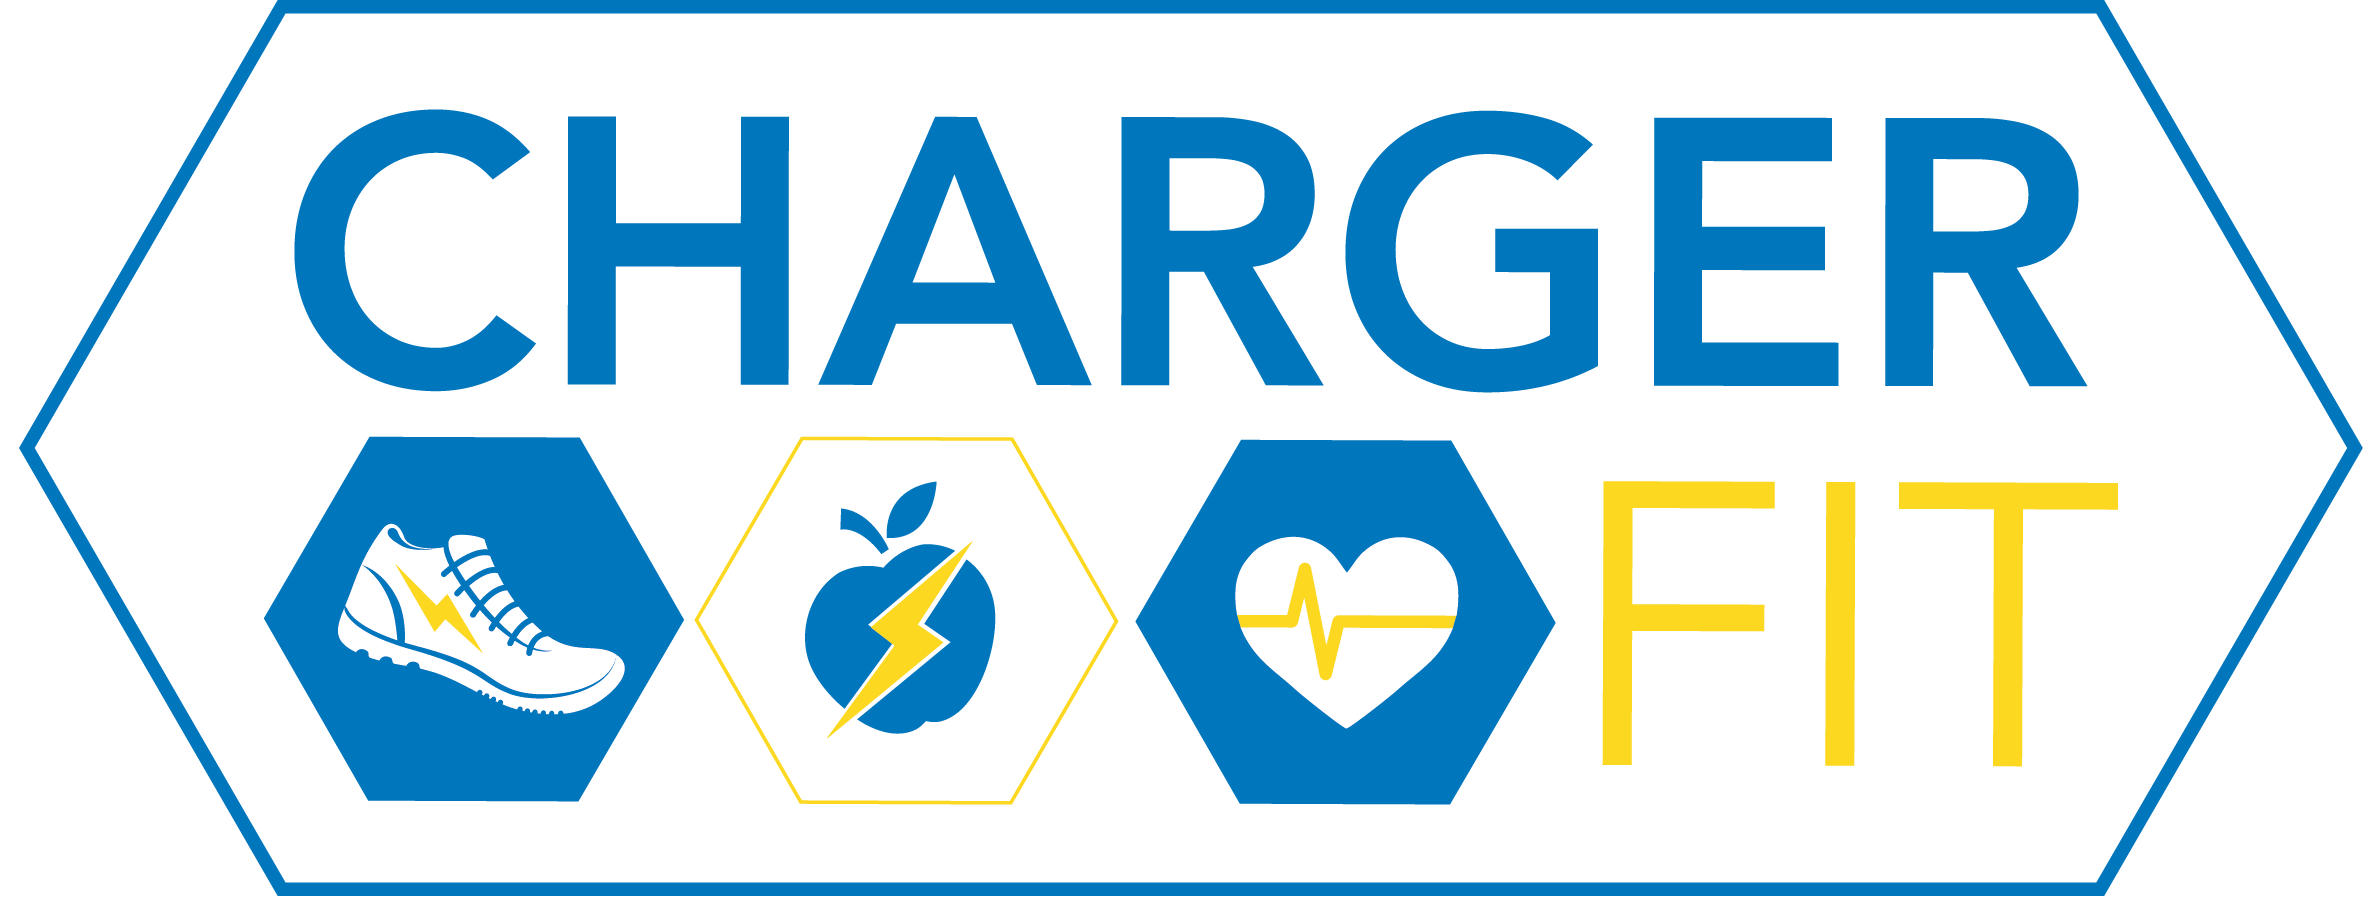 charger fit logo full color cropped